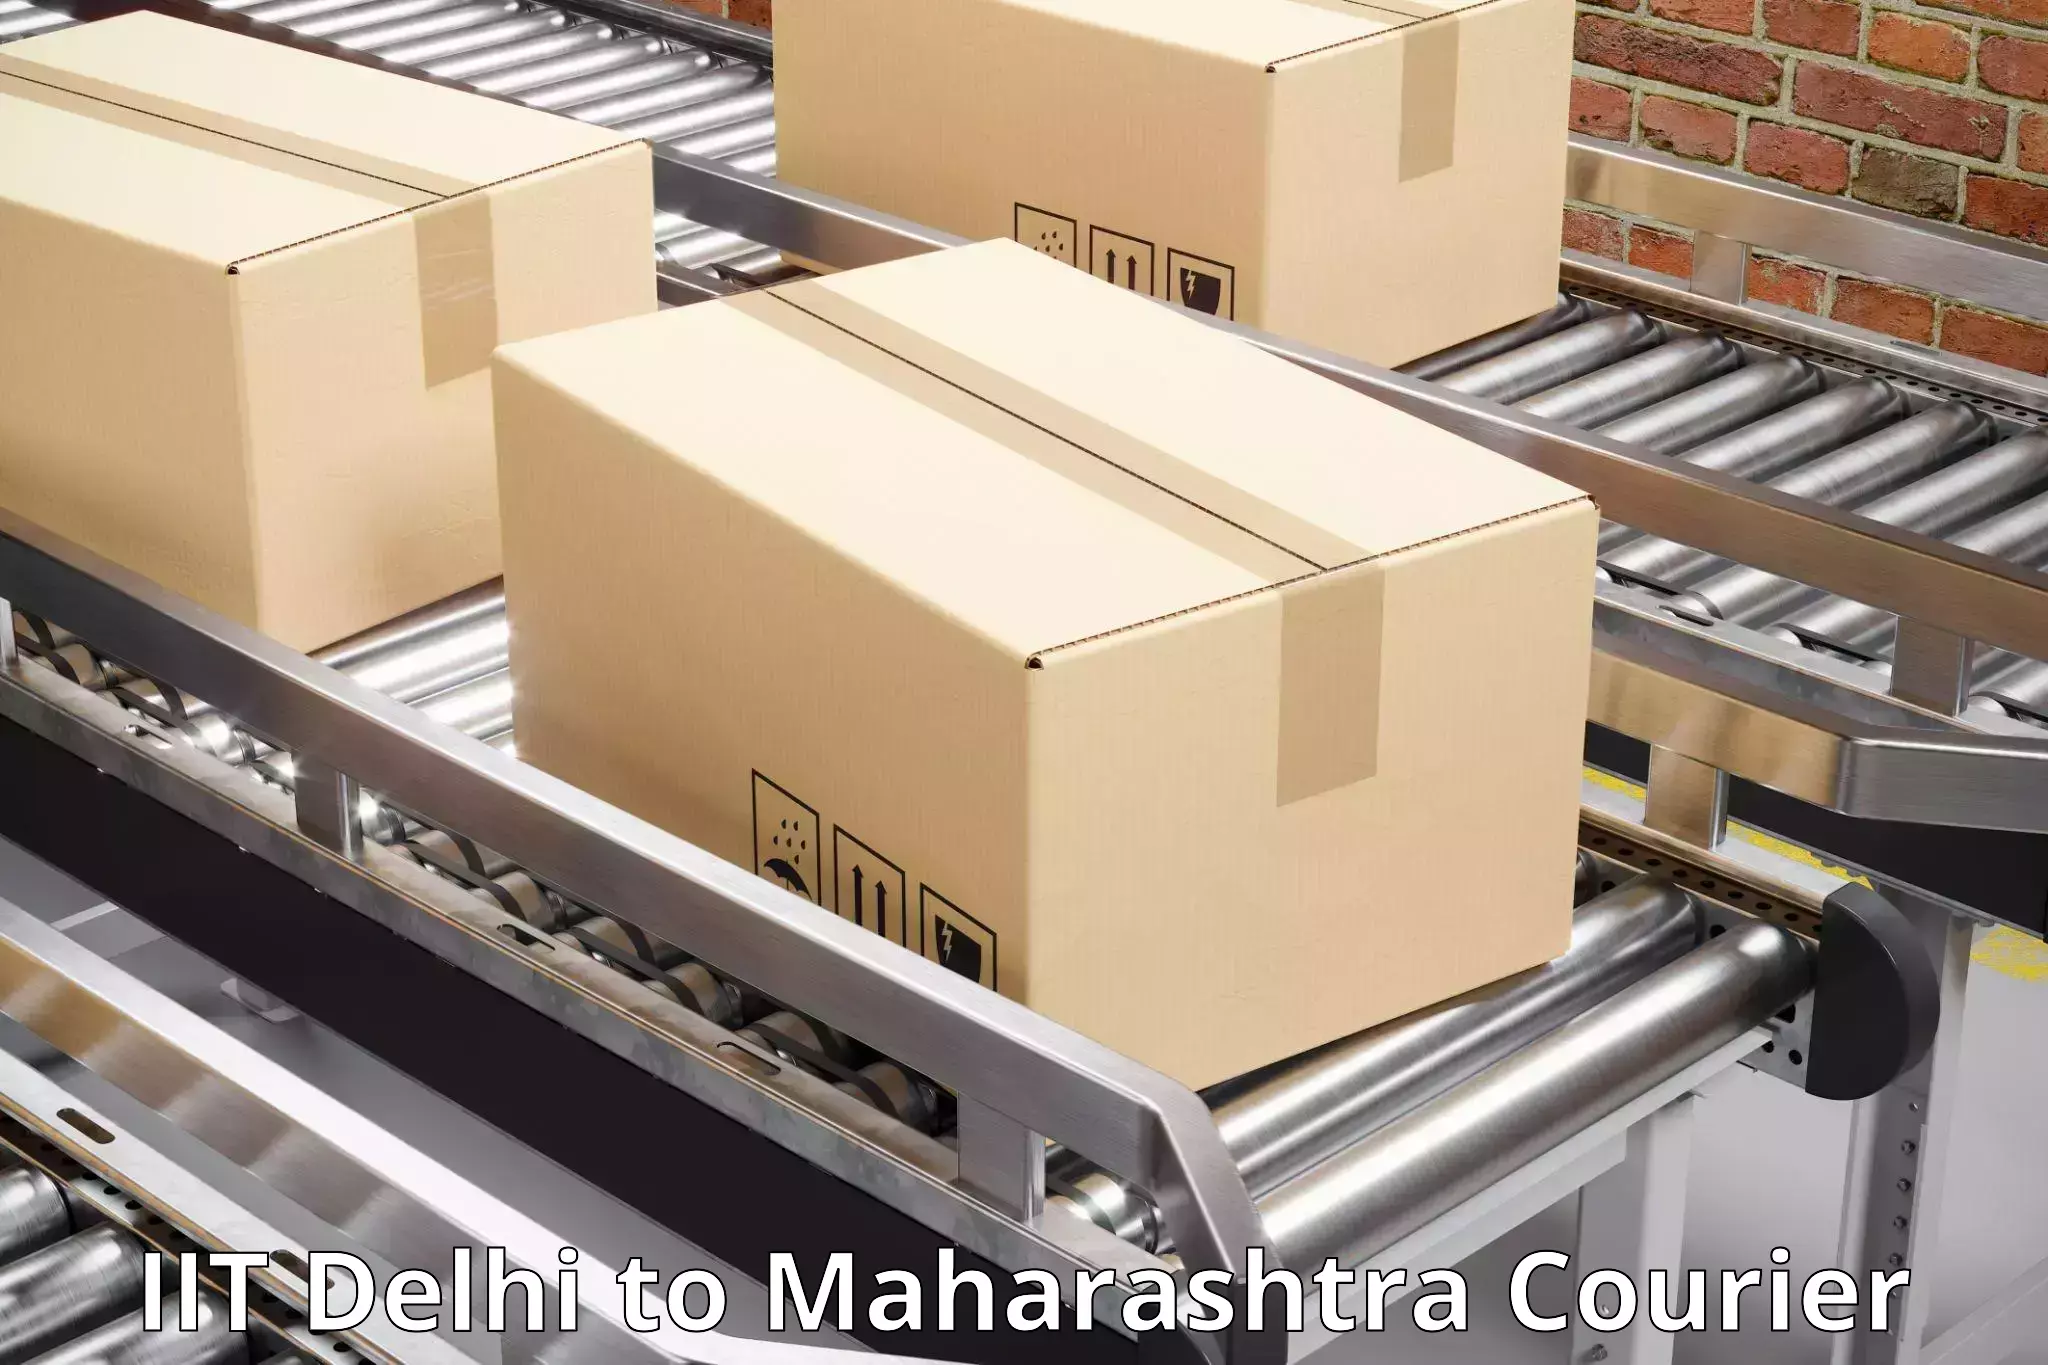 On-call courier service IIT Delhi to Masrul